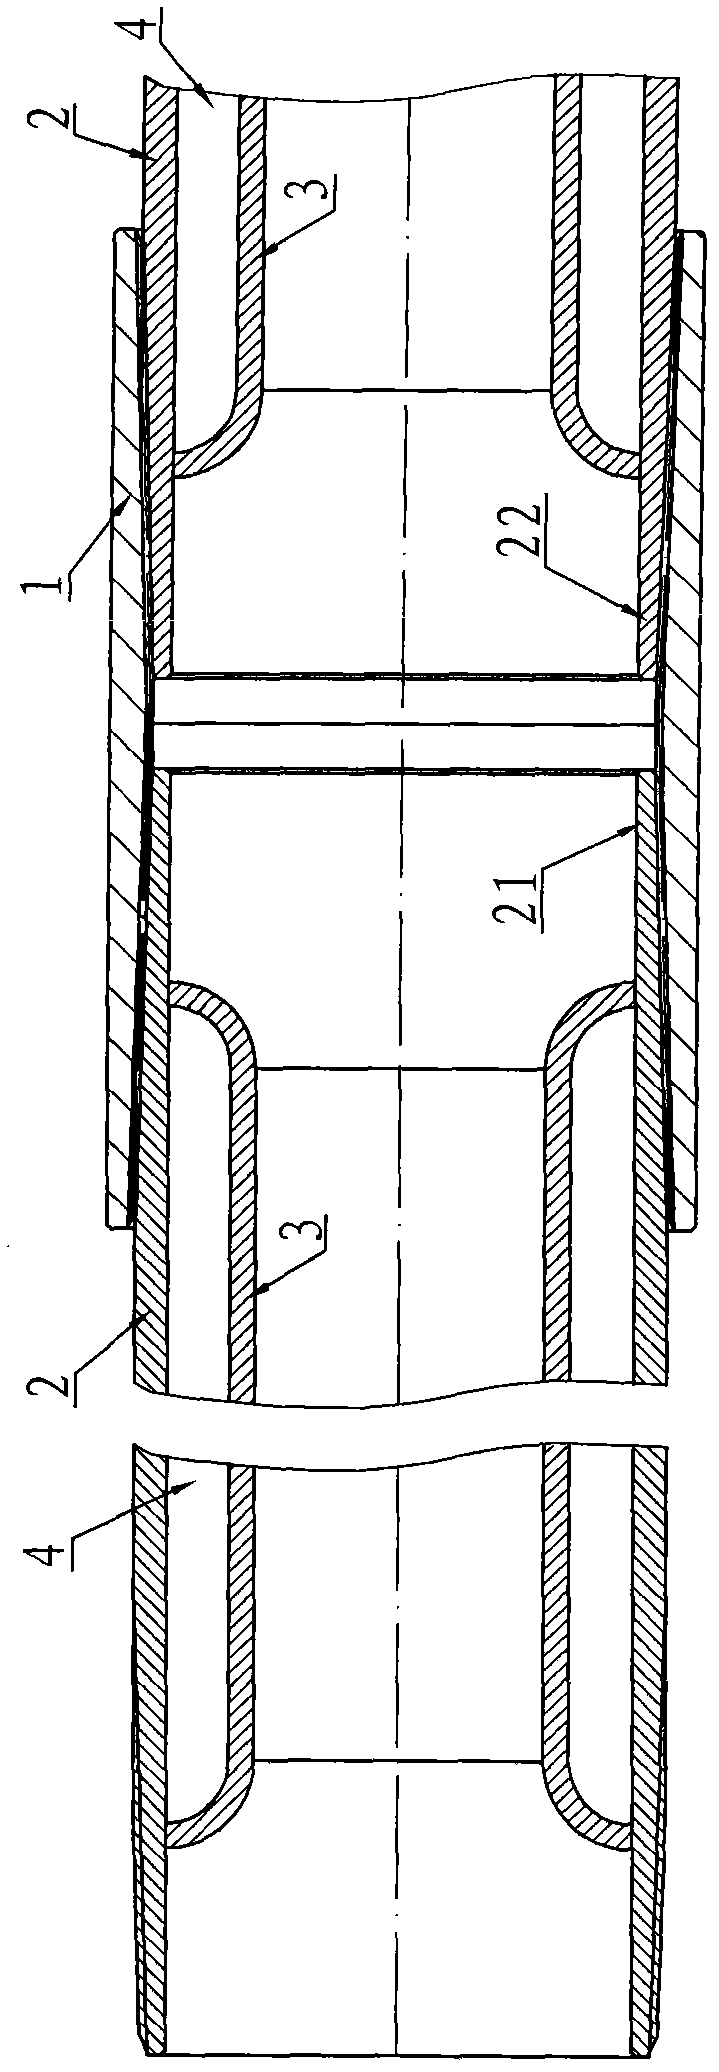 Integral-assembling type heat-insulating oil pipe connection structure